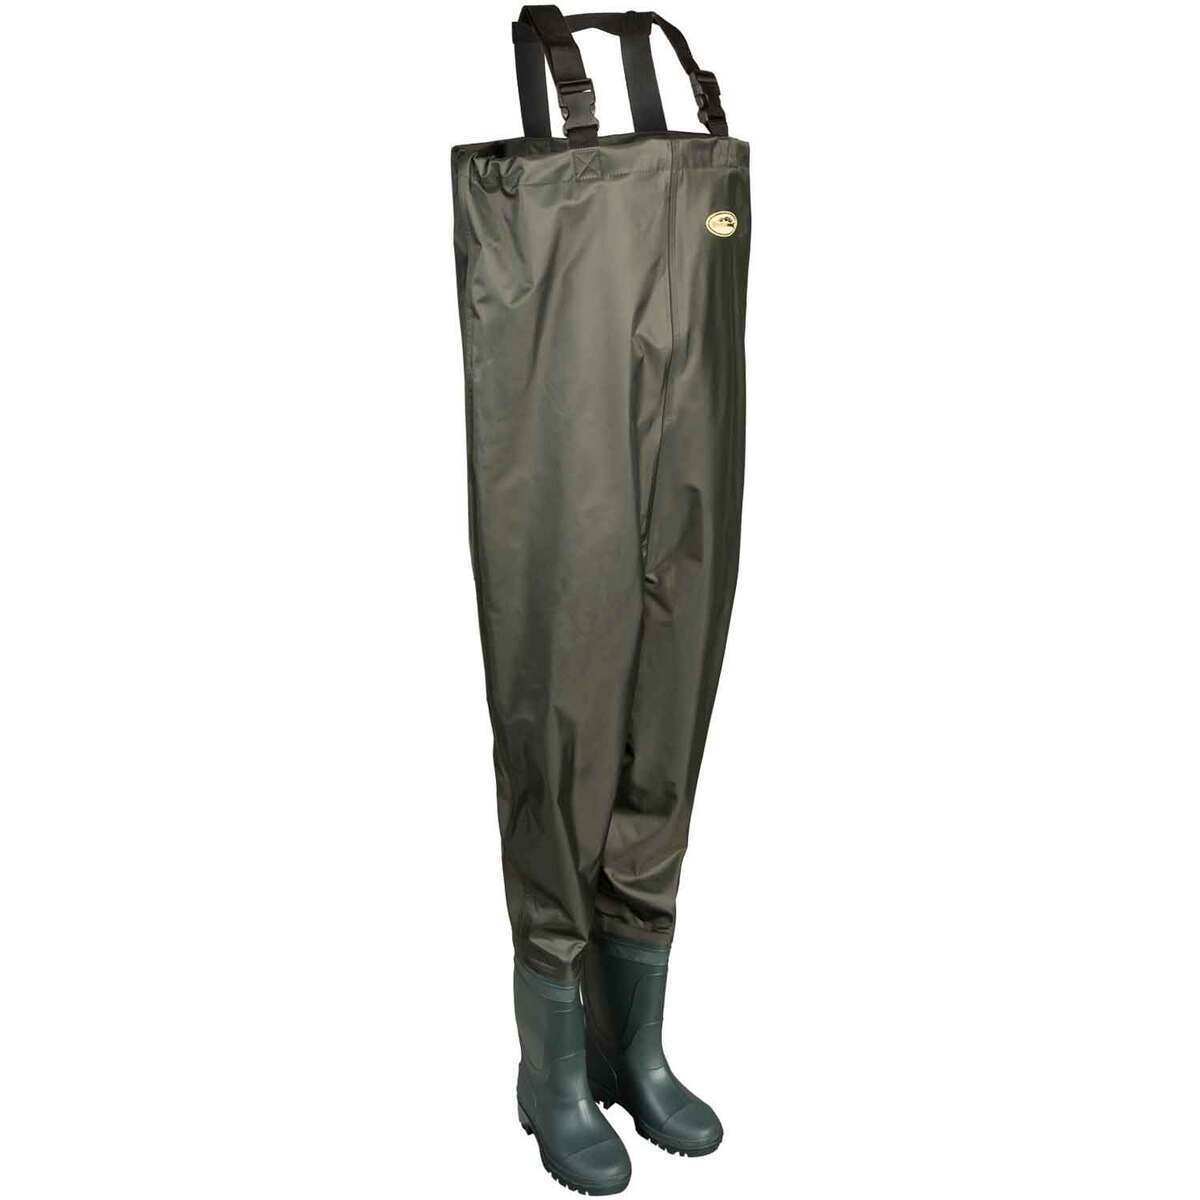 Caddis Women Fishing Waders for sale